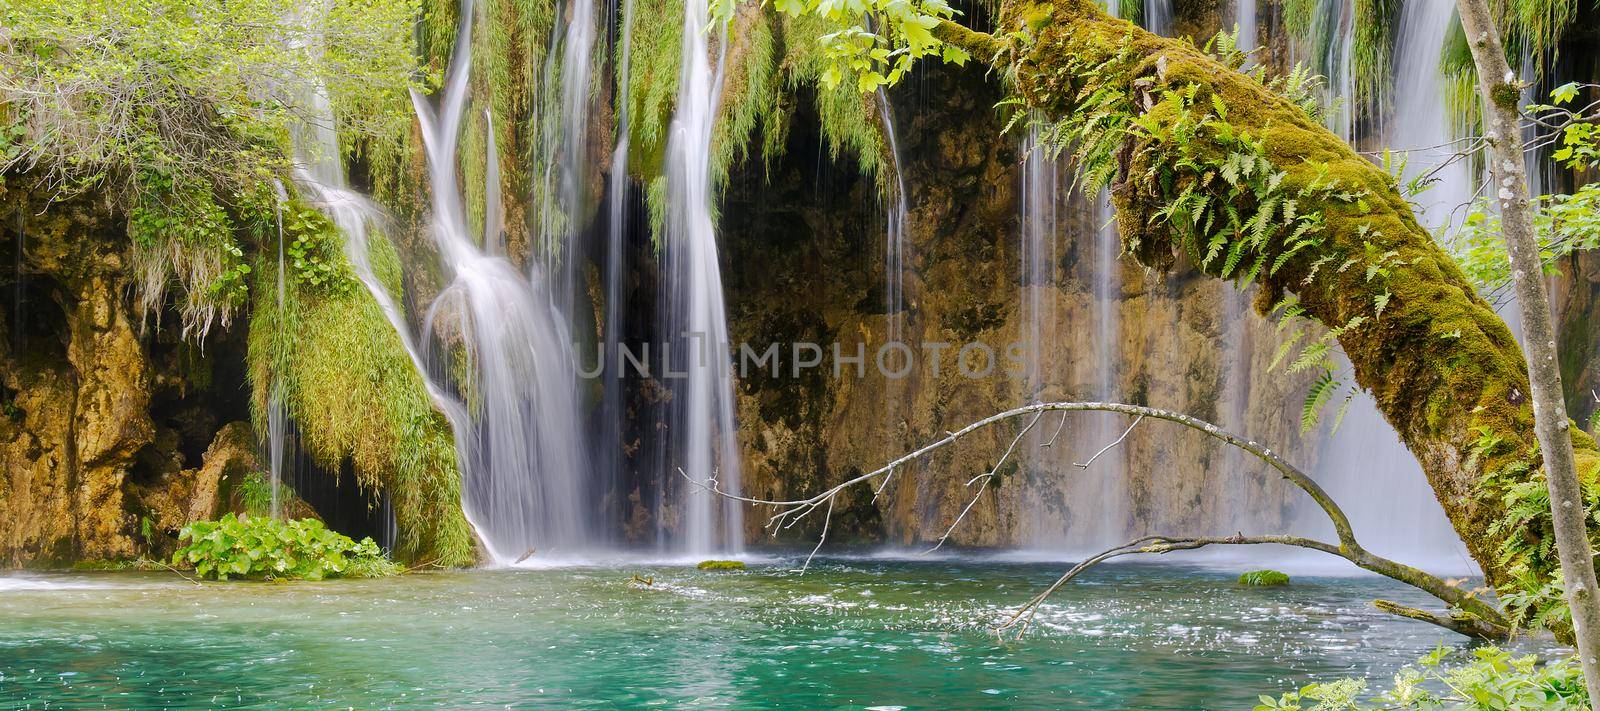 Waterfall in Plitvice Lakes national Park at summer, Croatia by PhotoTime